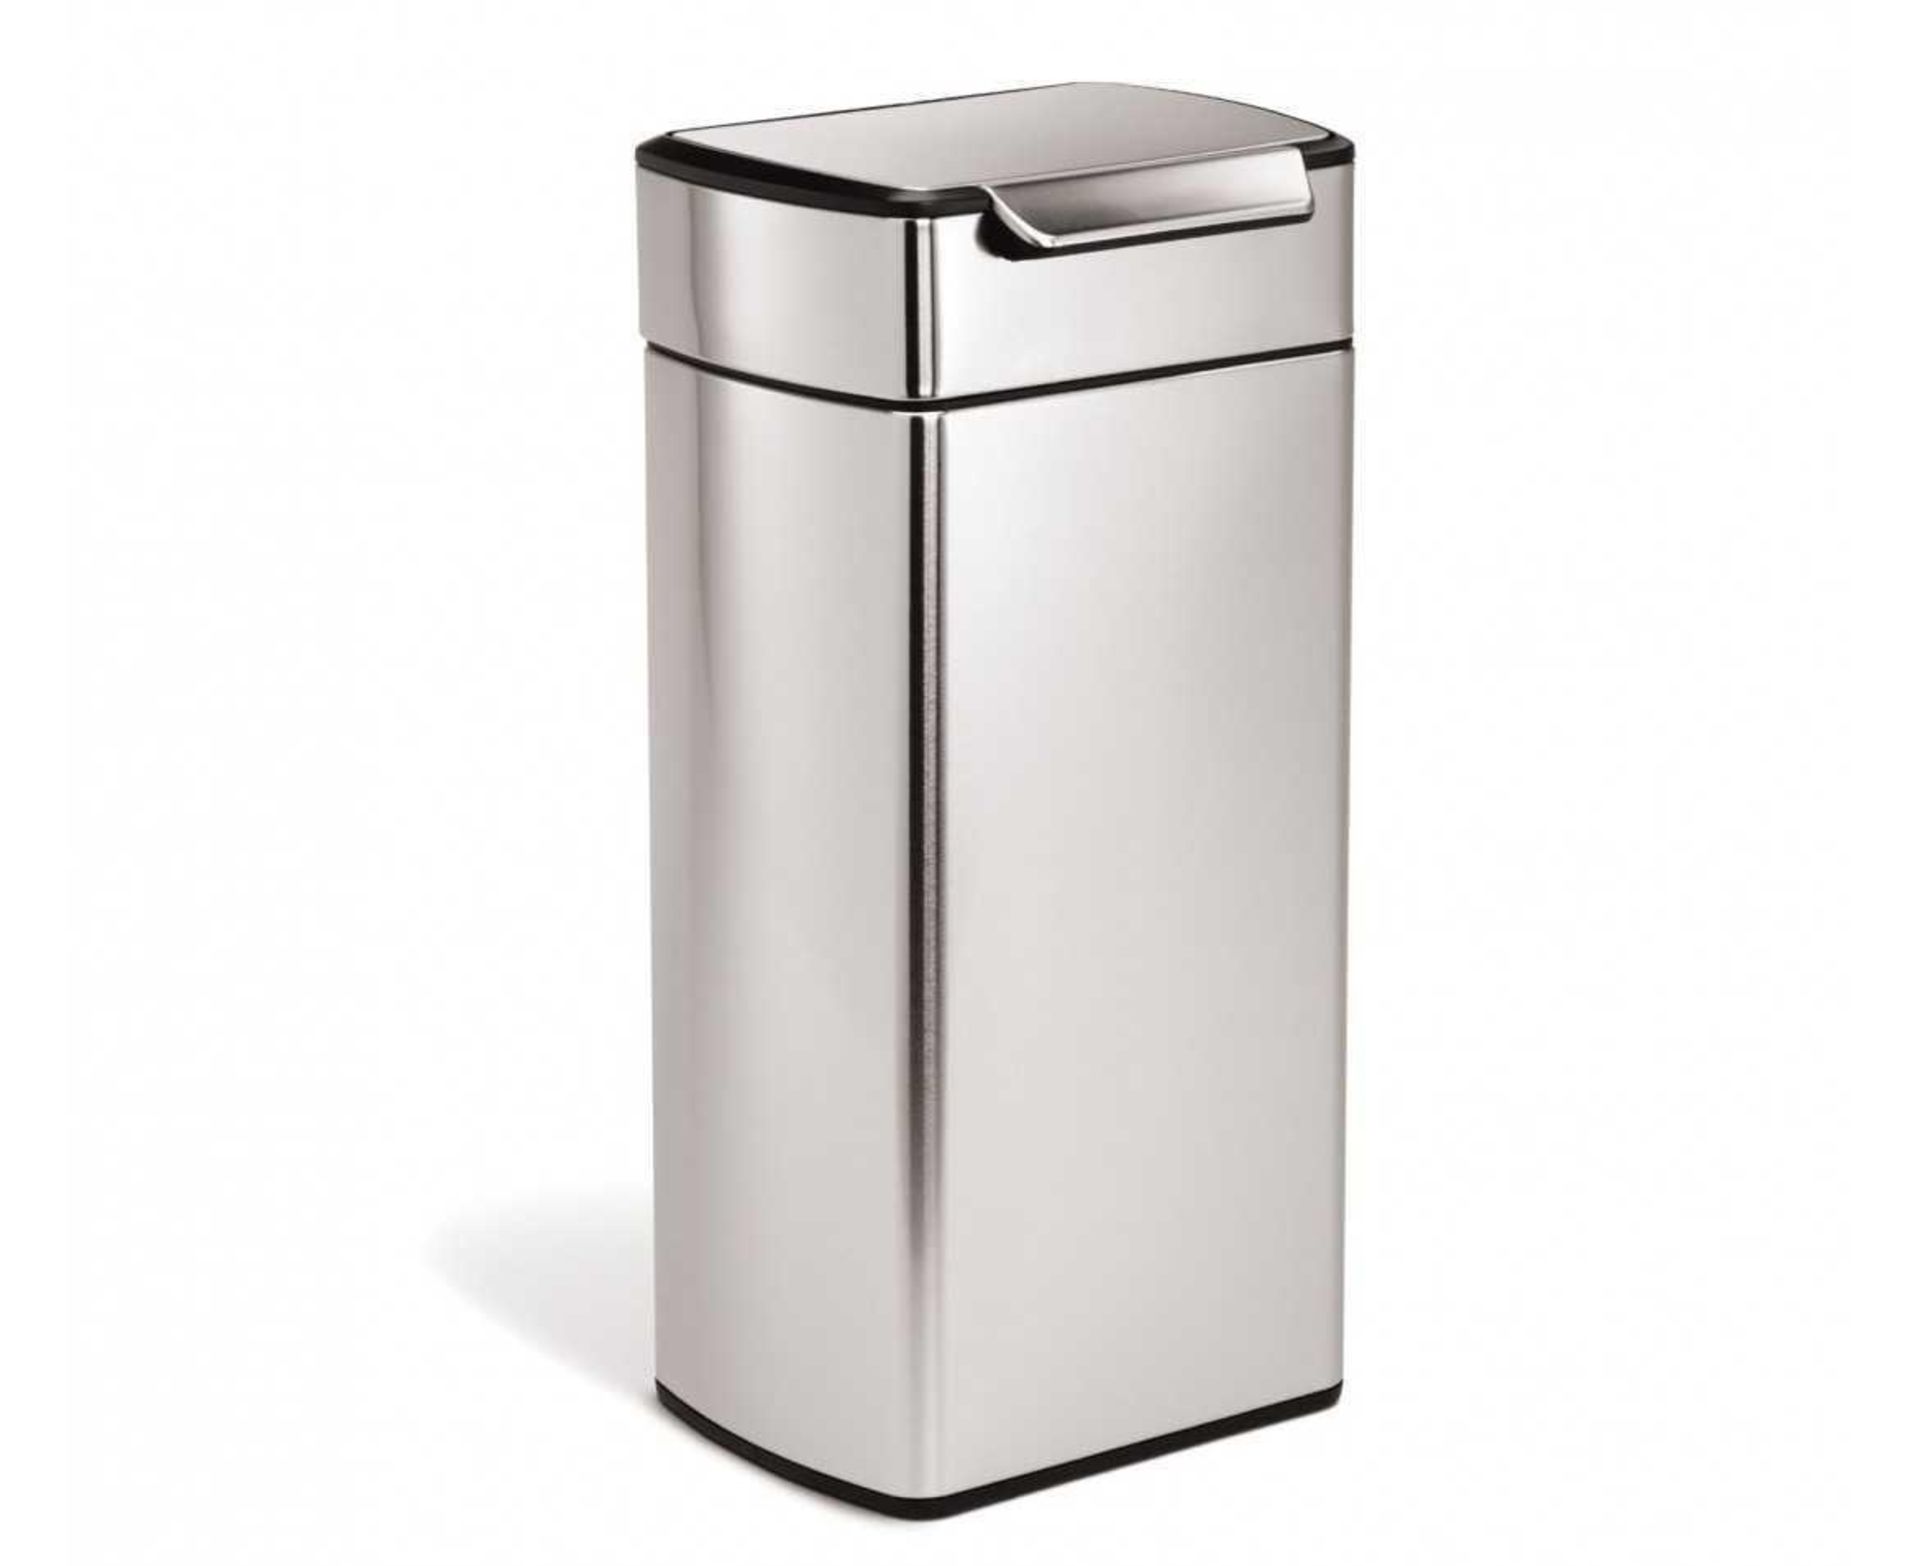 Rrp £100 Boxed Simplehuman 30L Stainless Steel Smart Touch Bin